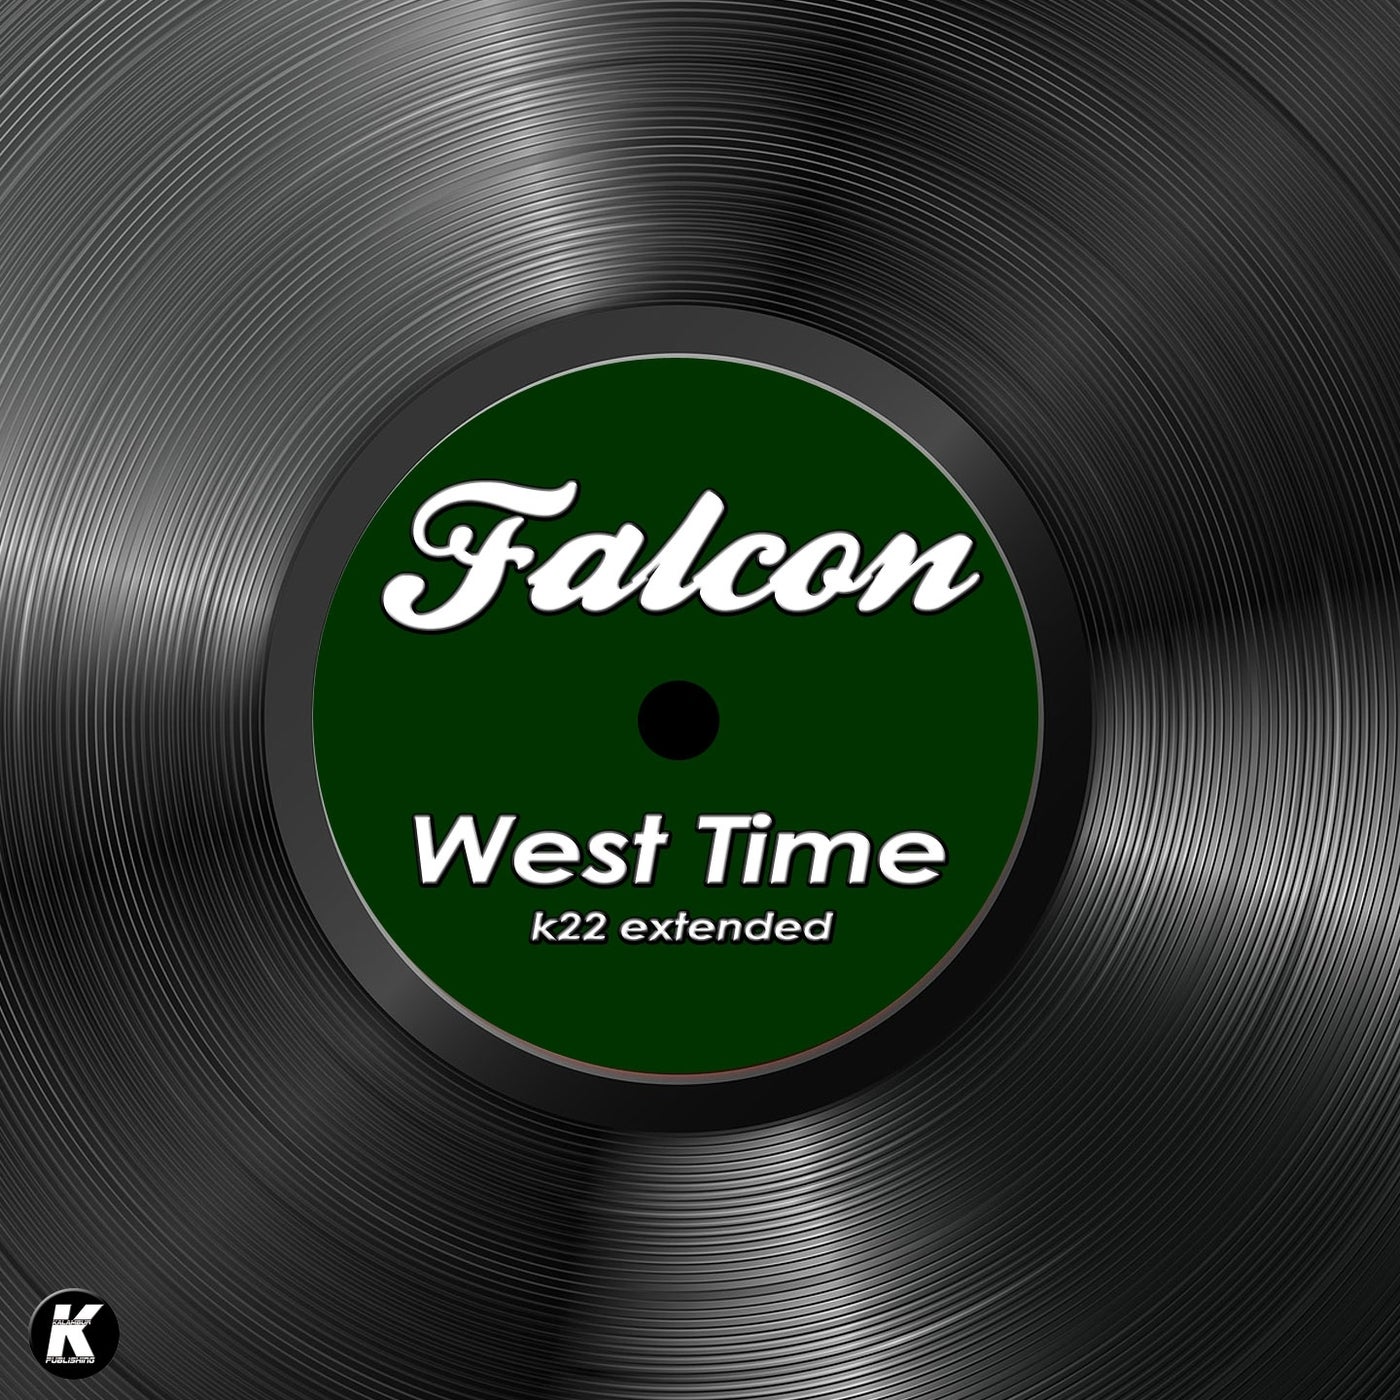 WEST TIME (K22 extended)